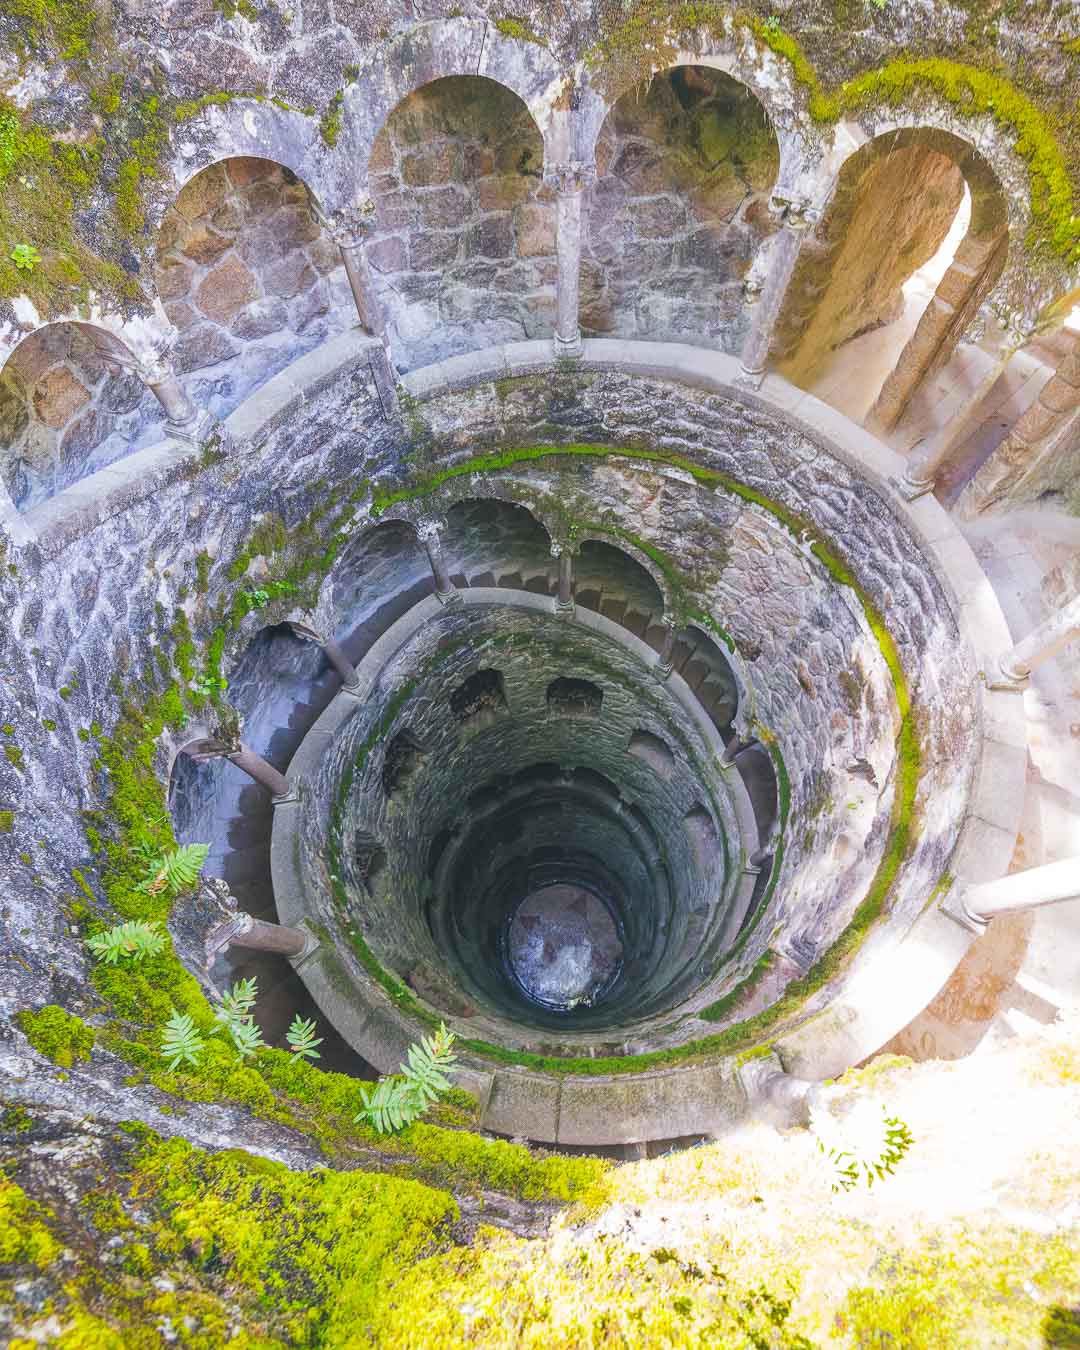 initiation well in quinta da regaleira after photo